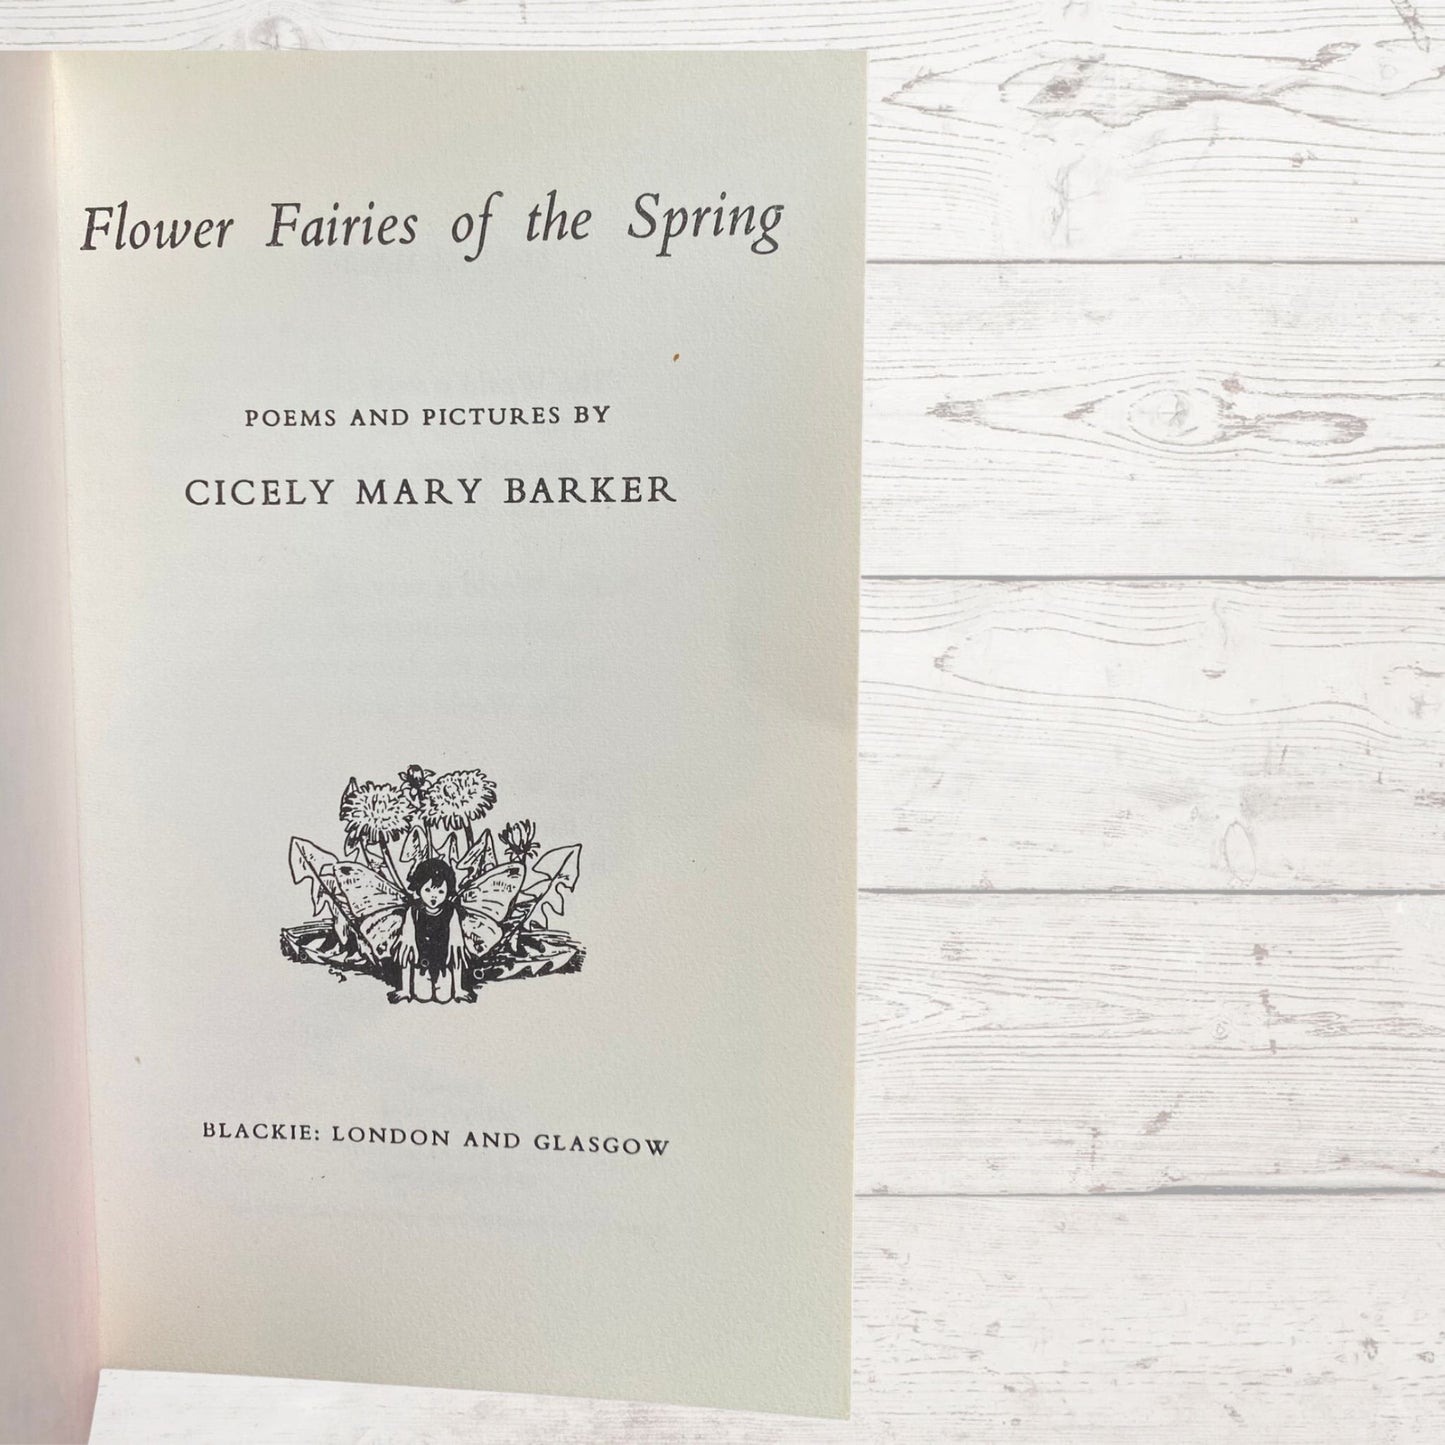 Flower Fairies of the Spring, 1970s edition by Cicely M Barker. Great gift idea